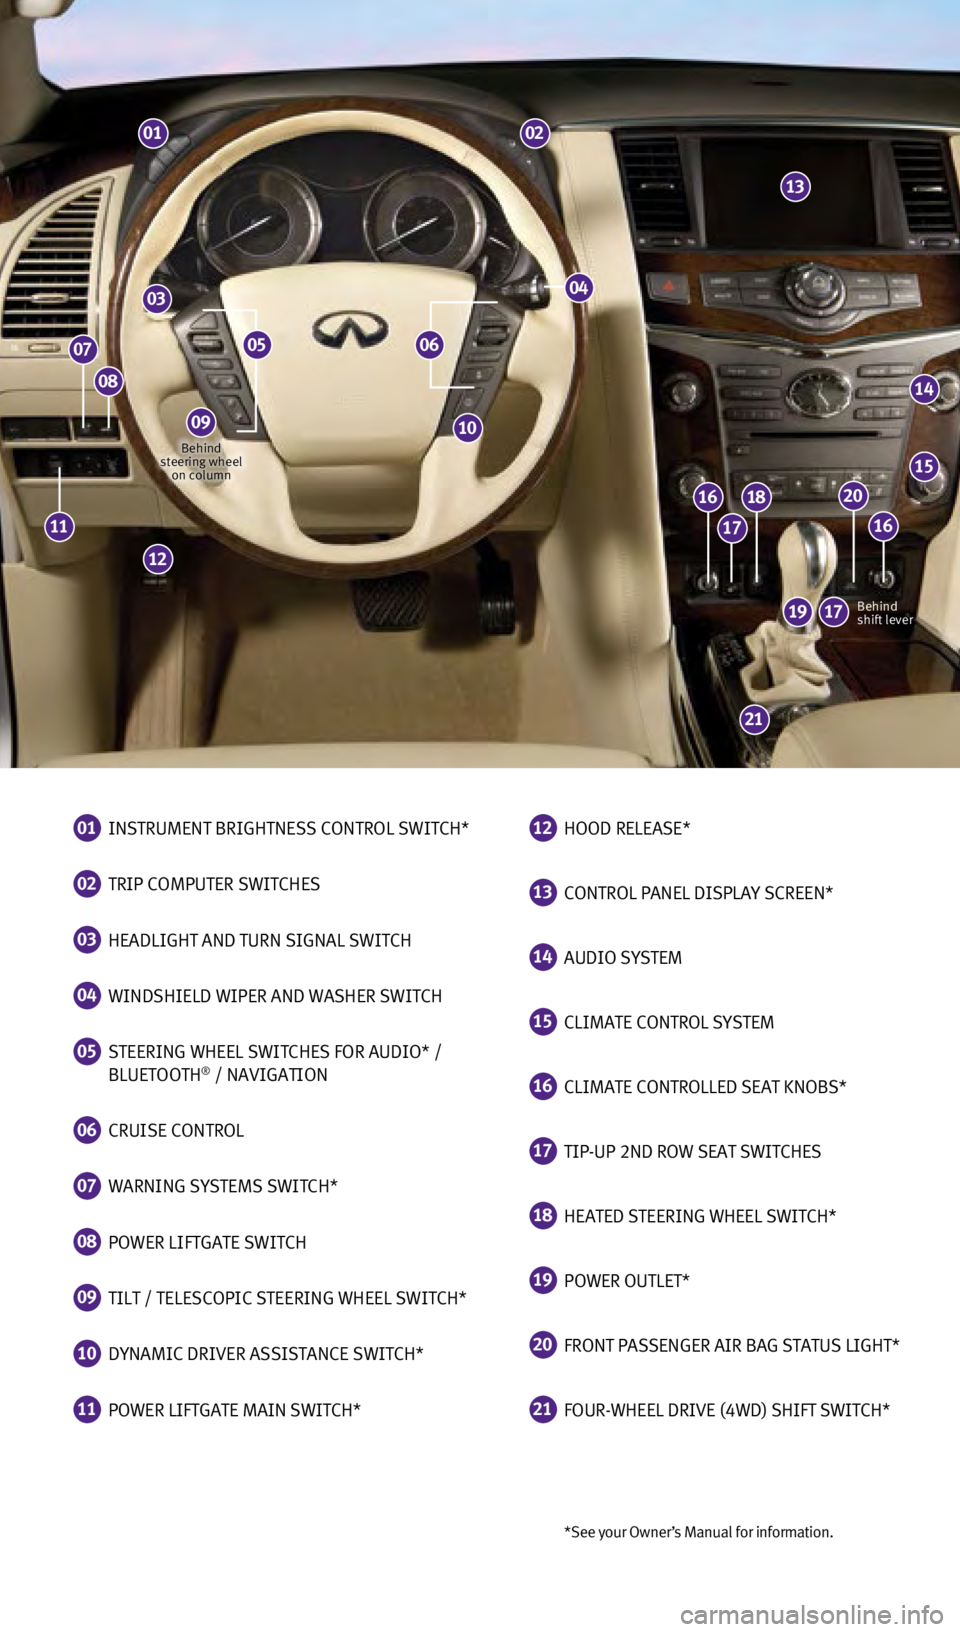 INFINITI QX80 2014  Quick Reference Guide *See your Owner ’s Manual for information.
01  INSTRUMENT BRIGHTNESS CONTROL SWITCH*
02  TRIP COMPUTER SWITCHES
03  HEADLIGHT AND TURN SIGNAL SWITCH
04  WINDSHIELD WIPER AND WASHER SWITCH
05   STEER